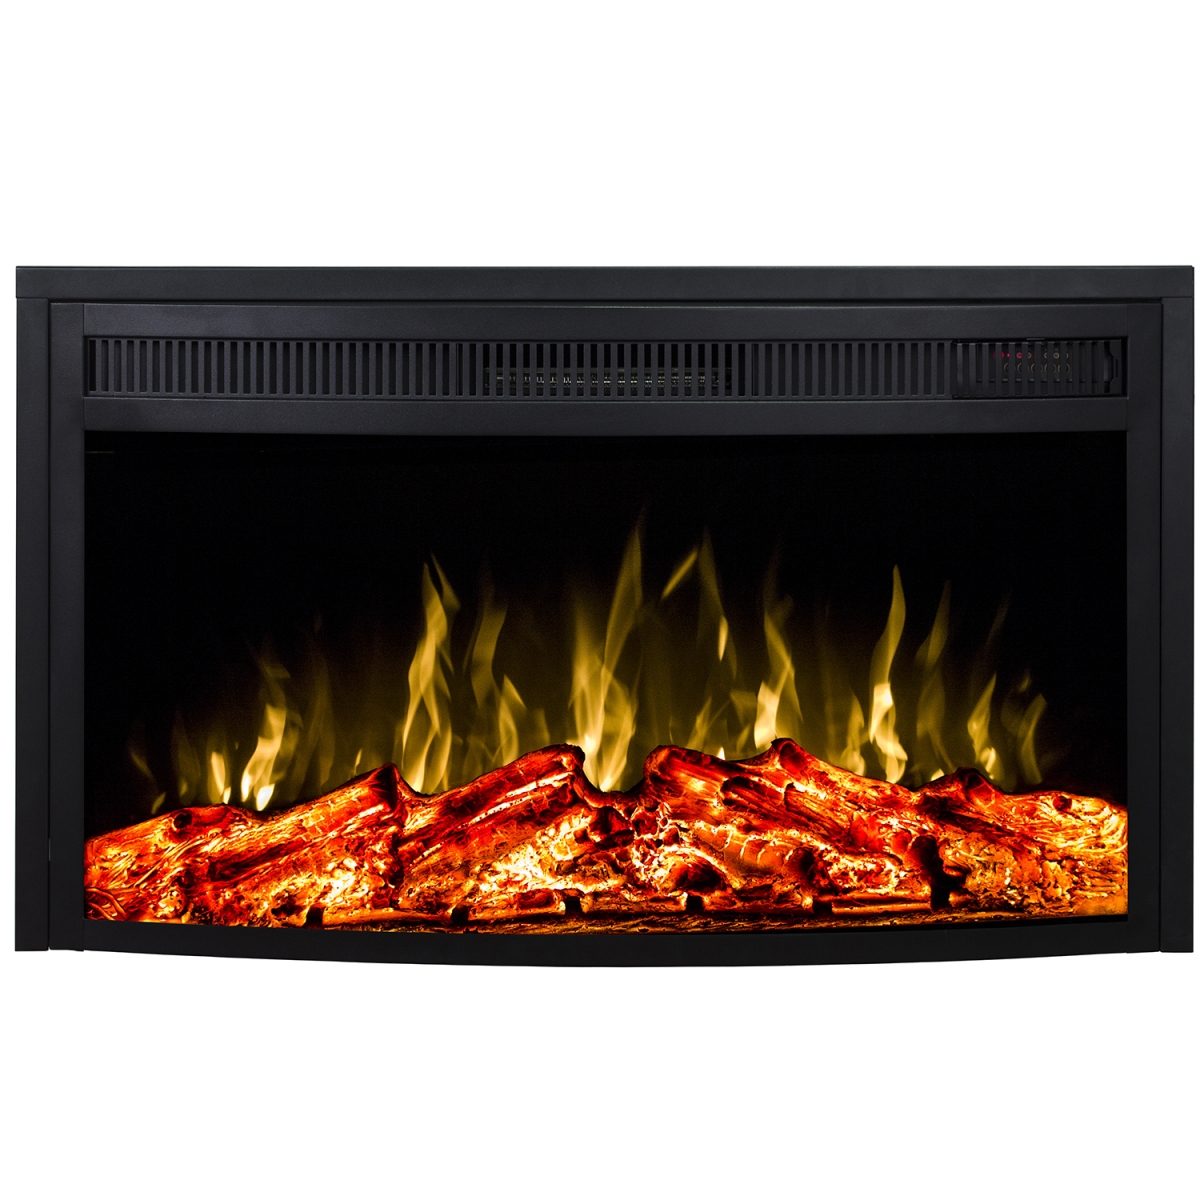 Lw2033crv-gl 33 In. Curved Ventless Heater Electric Fireplace Insert